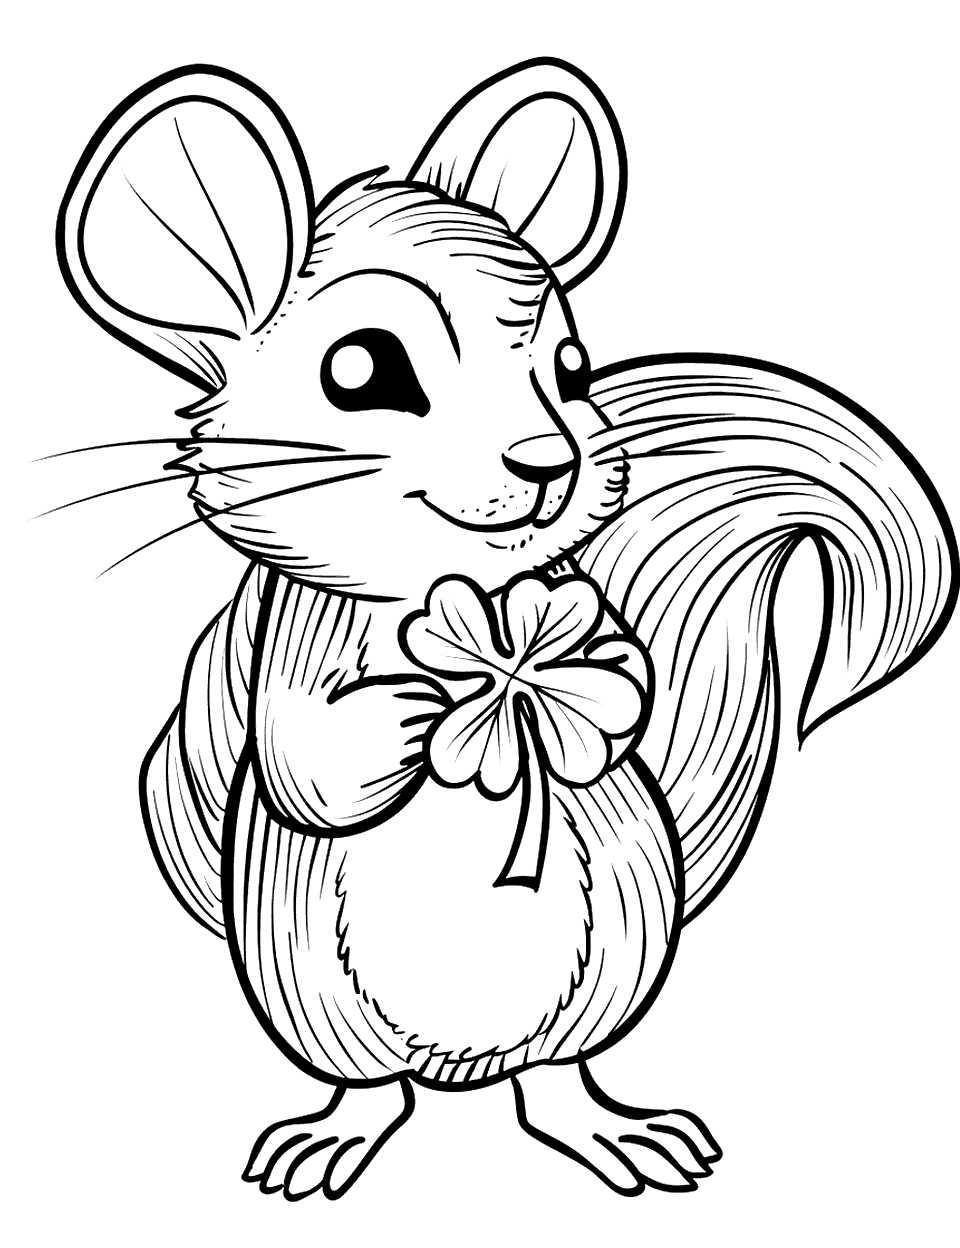 Squirrel Holding a Shamrock Coloring Page - A squirrel standing upright, holding a shamrock in its paws with a curious expression.